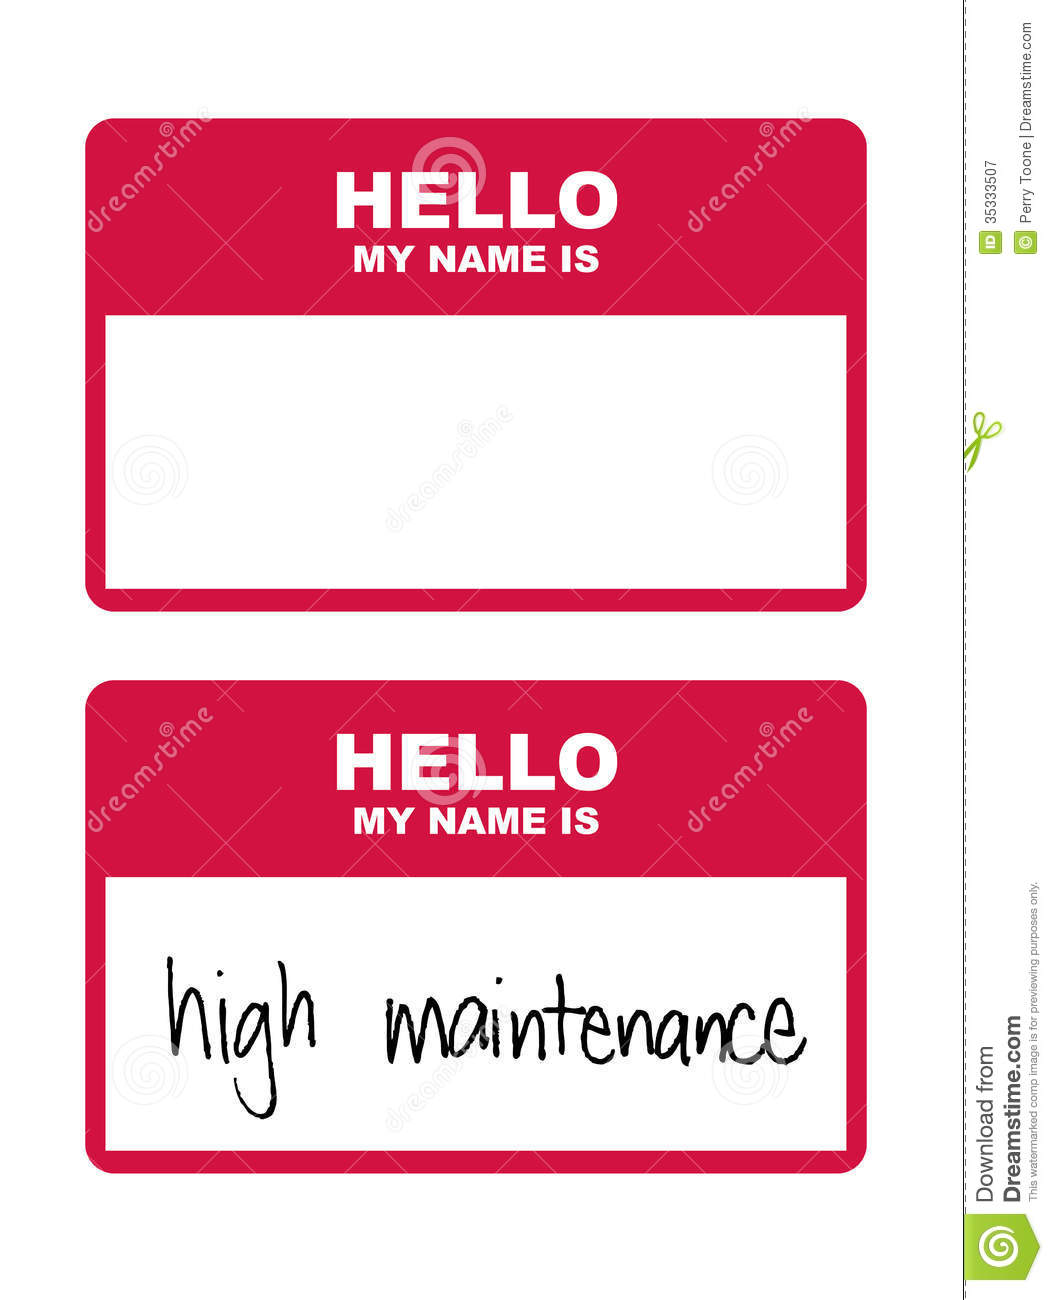 Hello My Name Is Tag With Blank Version And One Written With High